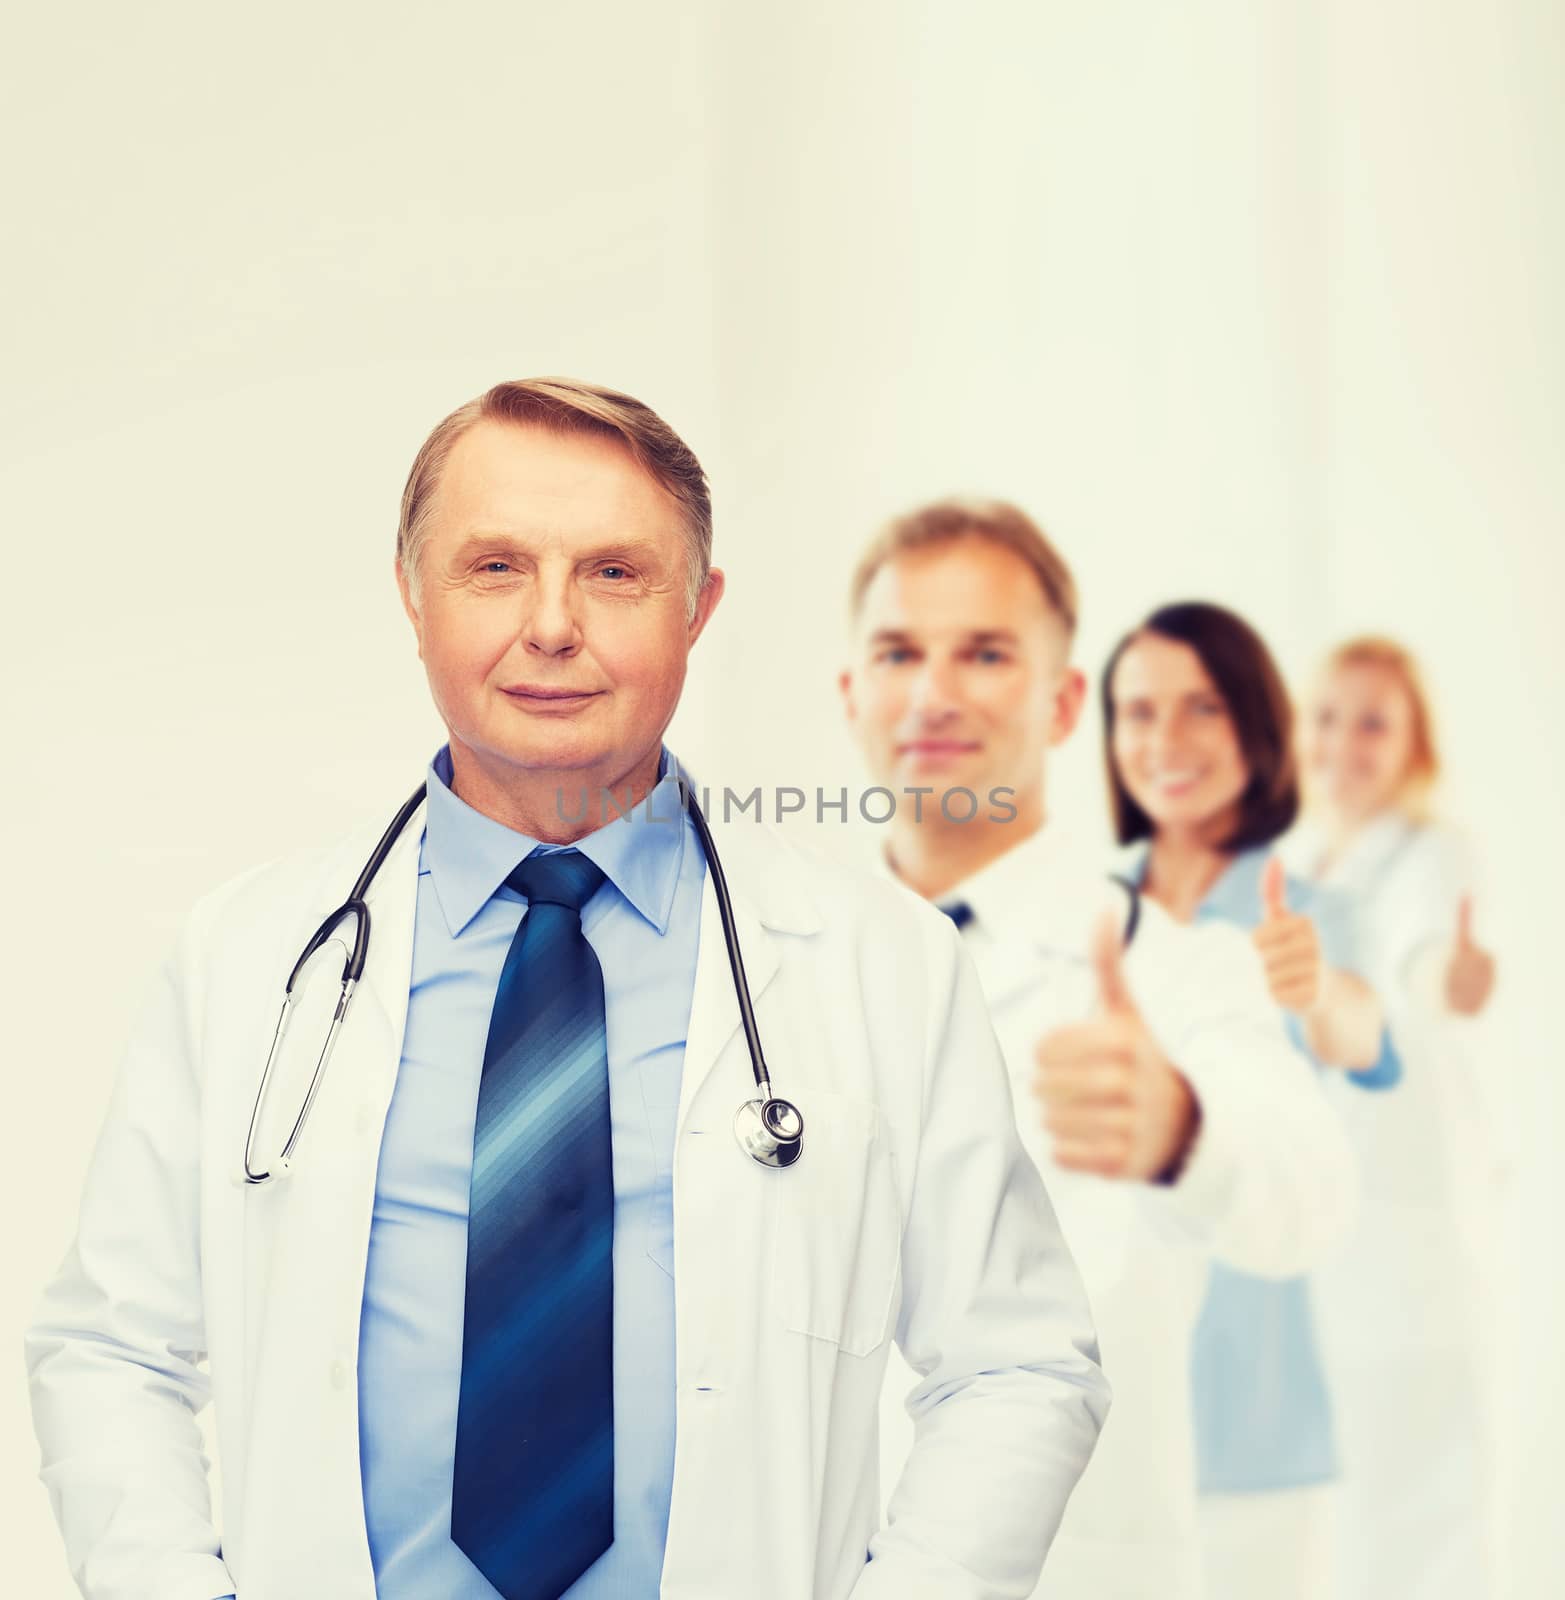 smiling doctor or professor with stethoscope by dolgachov